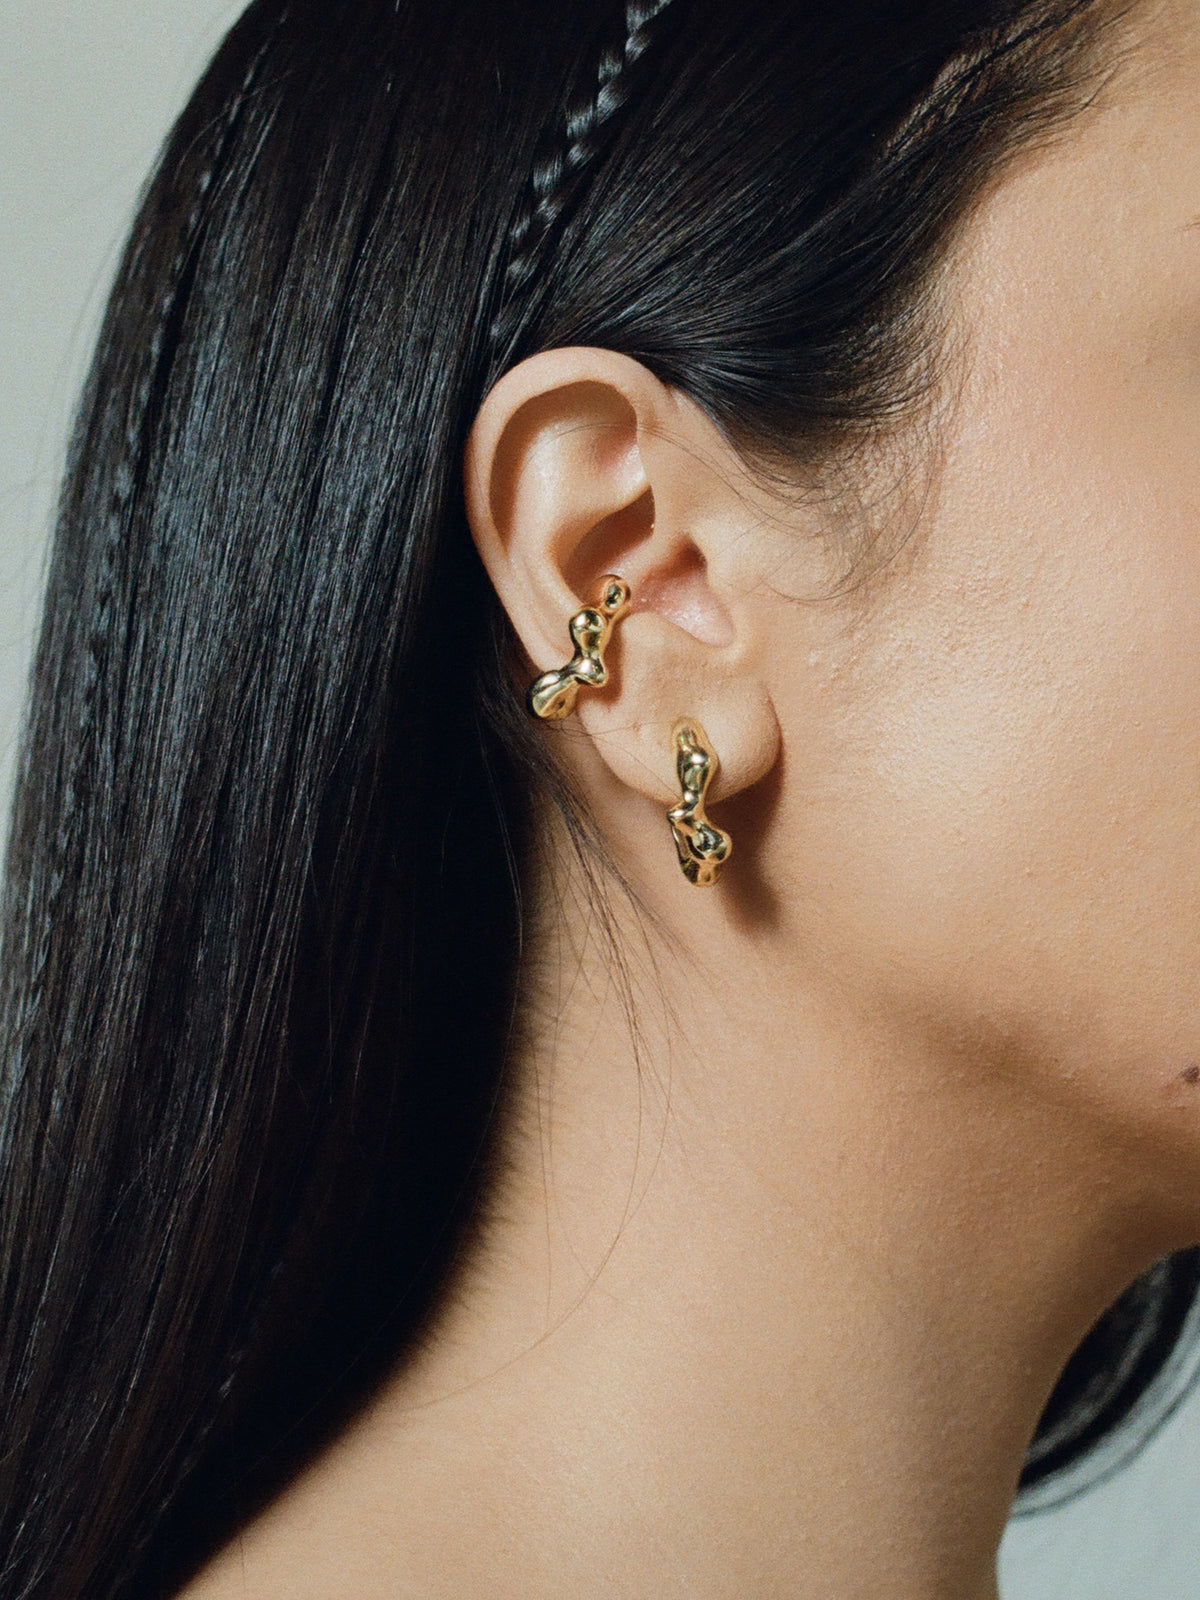 FARIS SEEP Hoop Small in 14k gold plate shown on model. Styled with SEEP Ear Cuff in 14k gold plate.